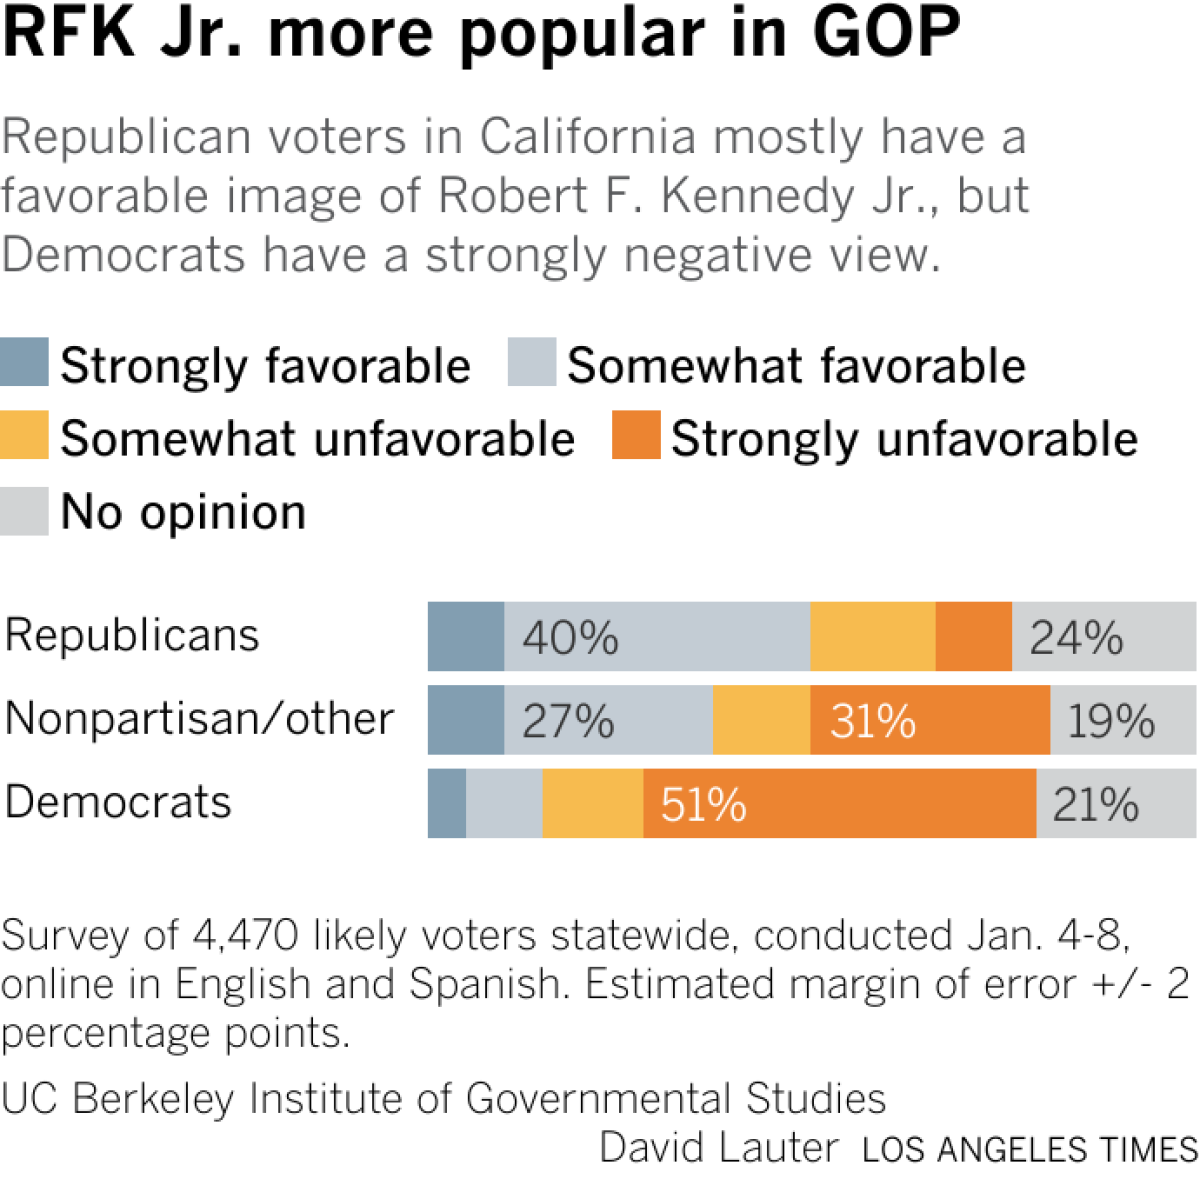 Republican voters in California mostly have a favorable view of Robert F. Kennedy Jr., but Democrats have a strongly negative view.